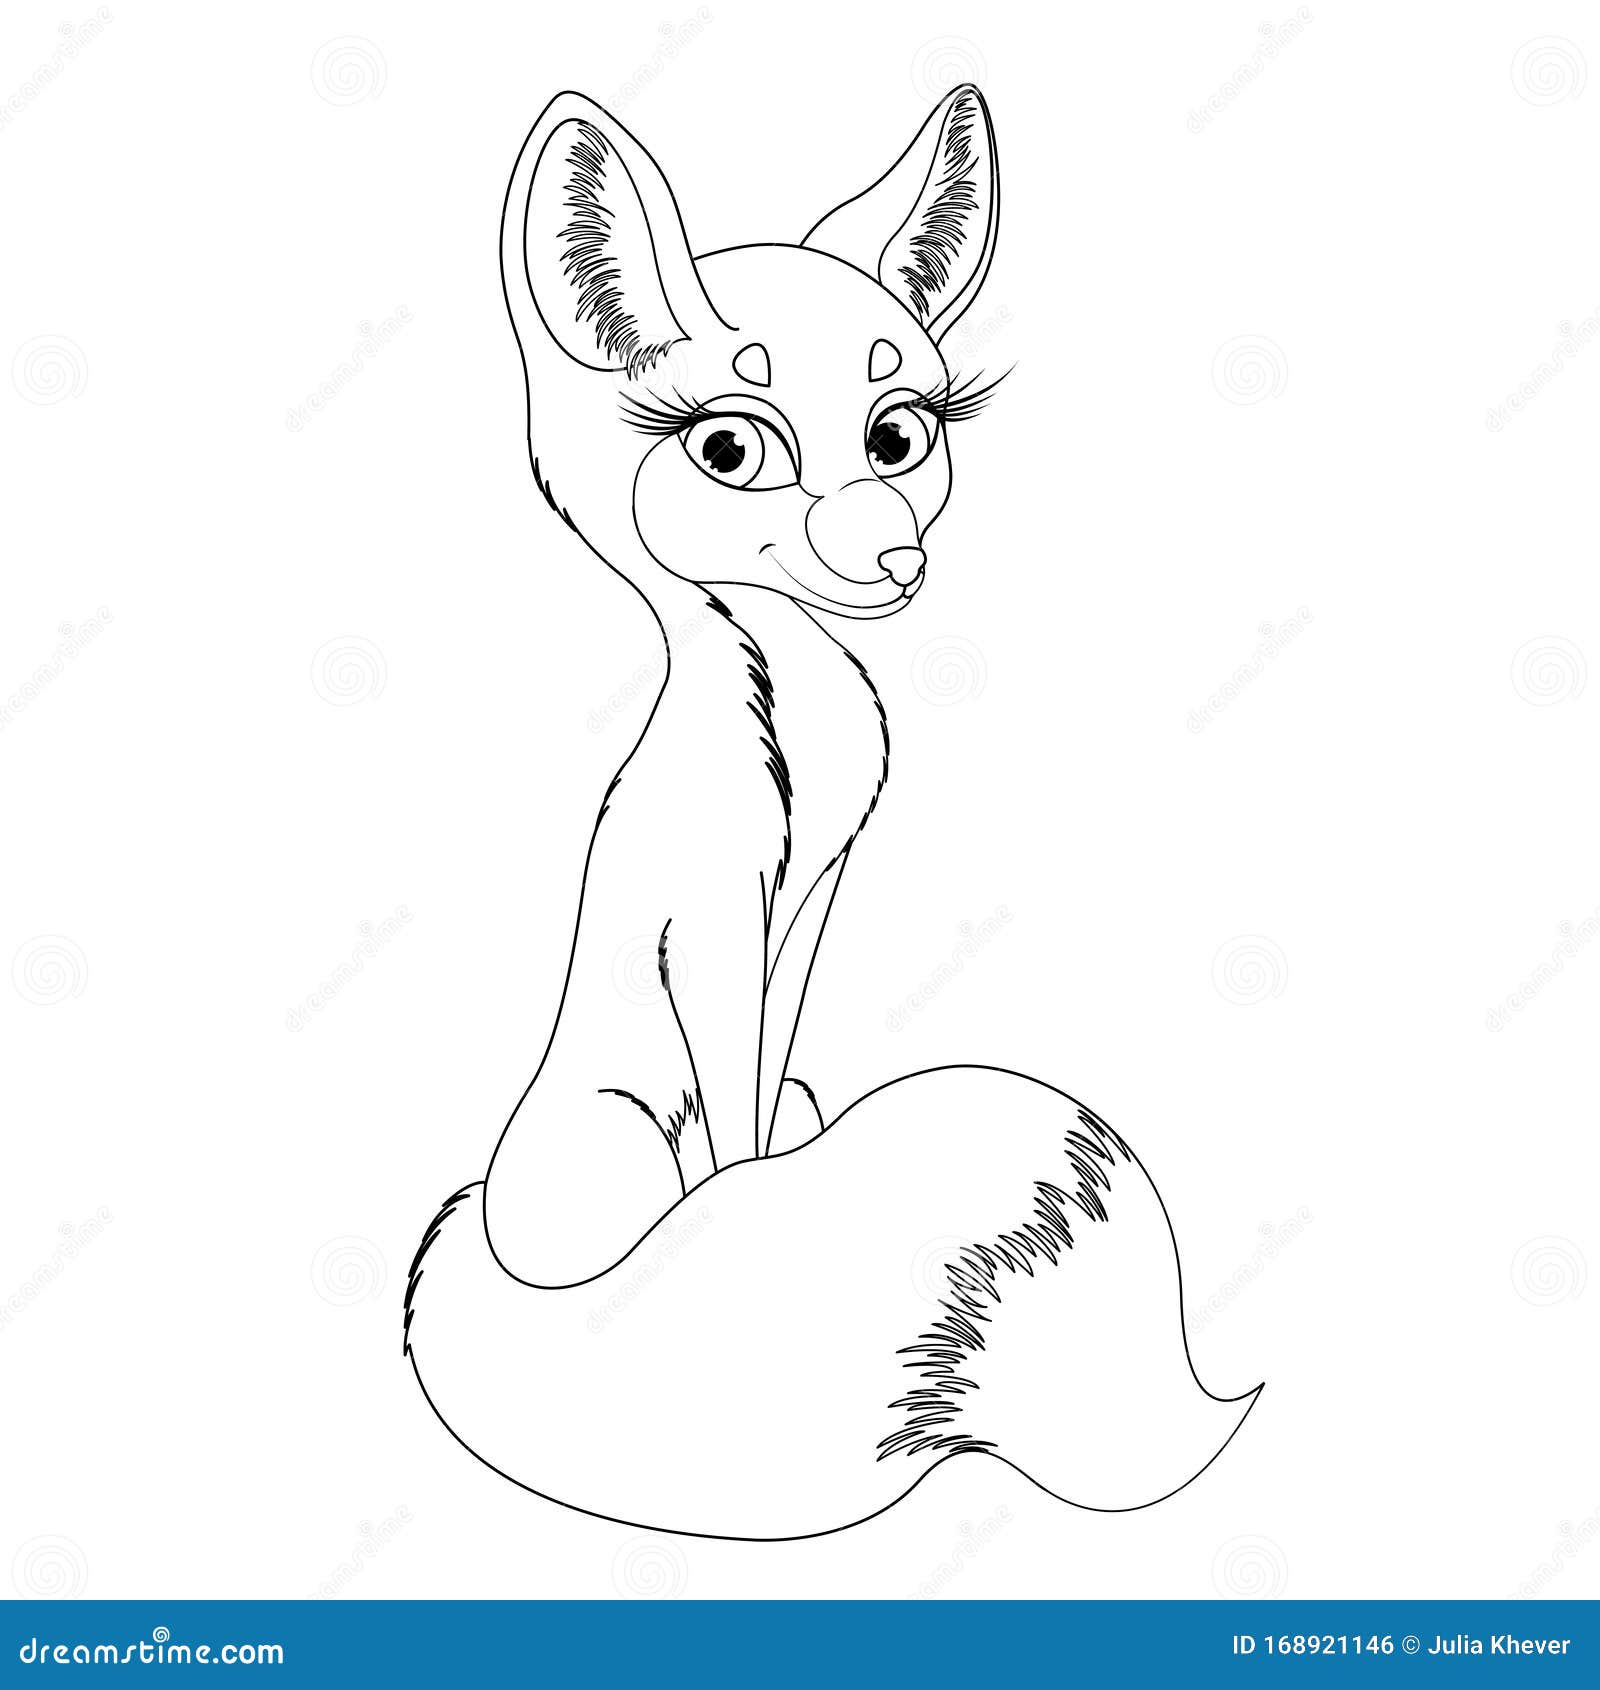 Coloring Page For Kids With Charming Fennec Fox. Stock Vector